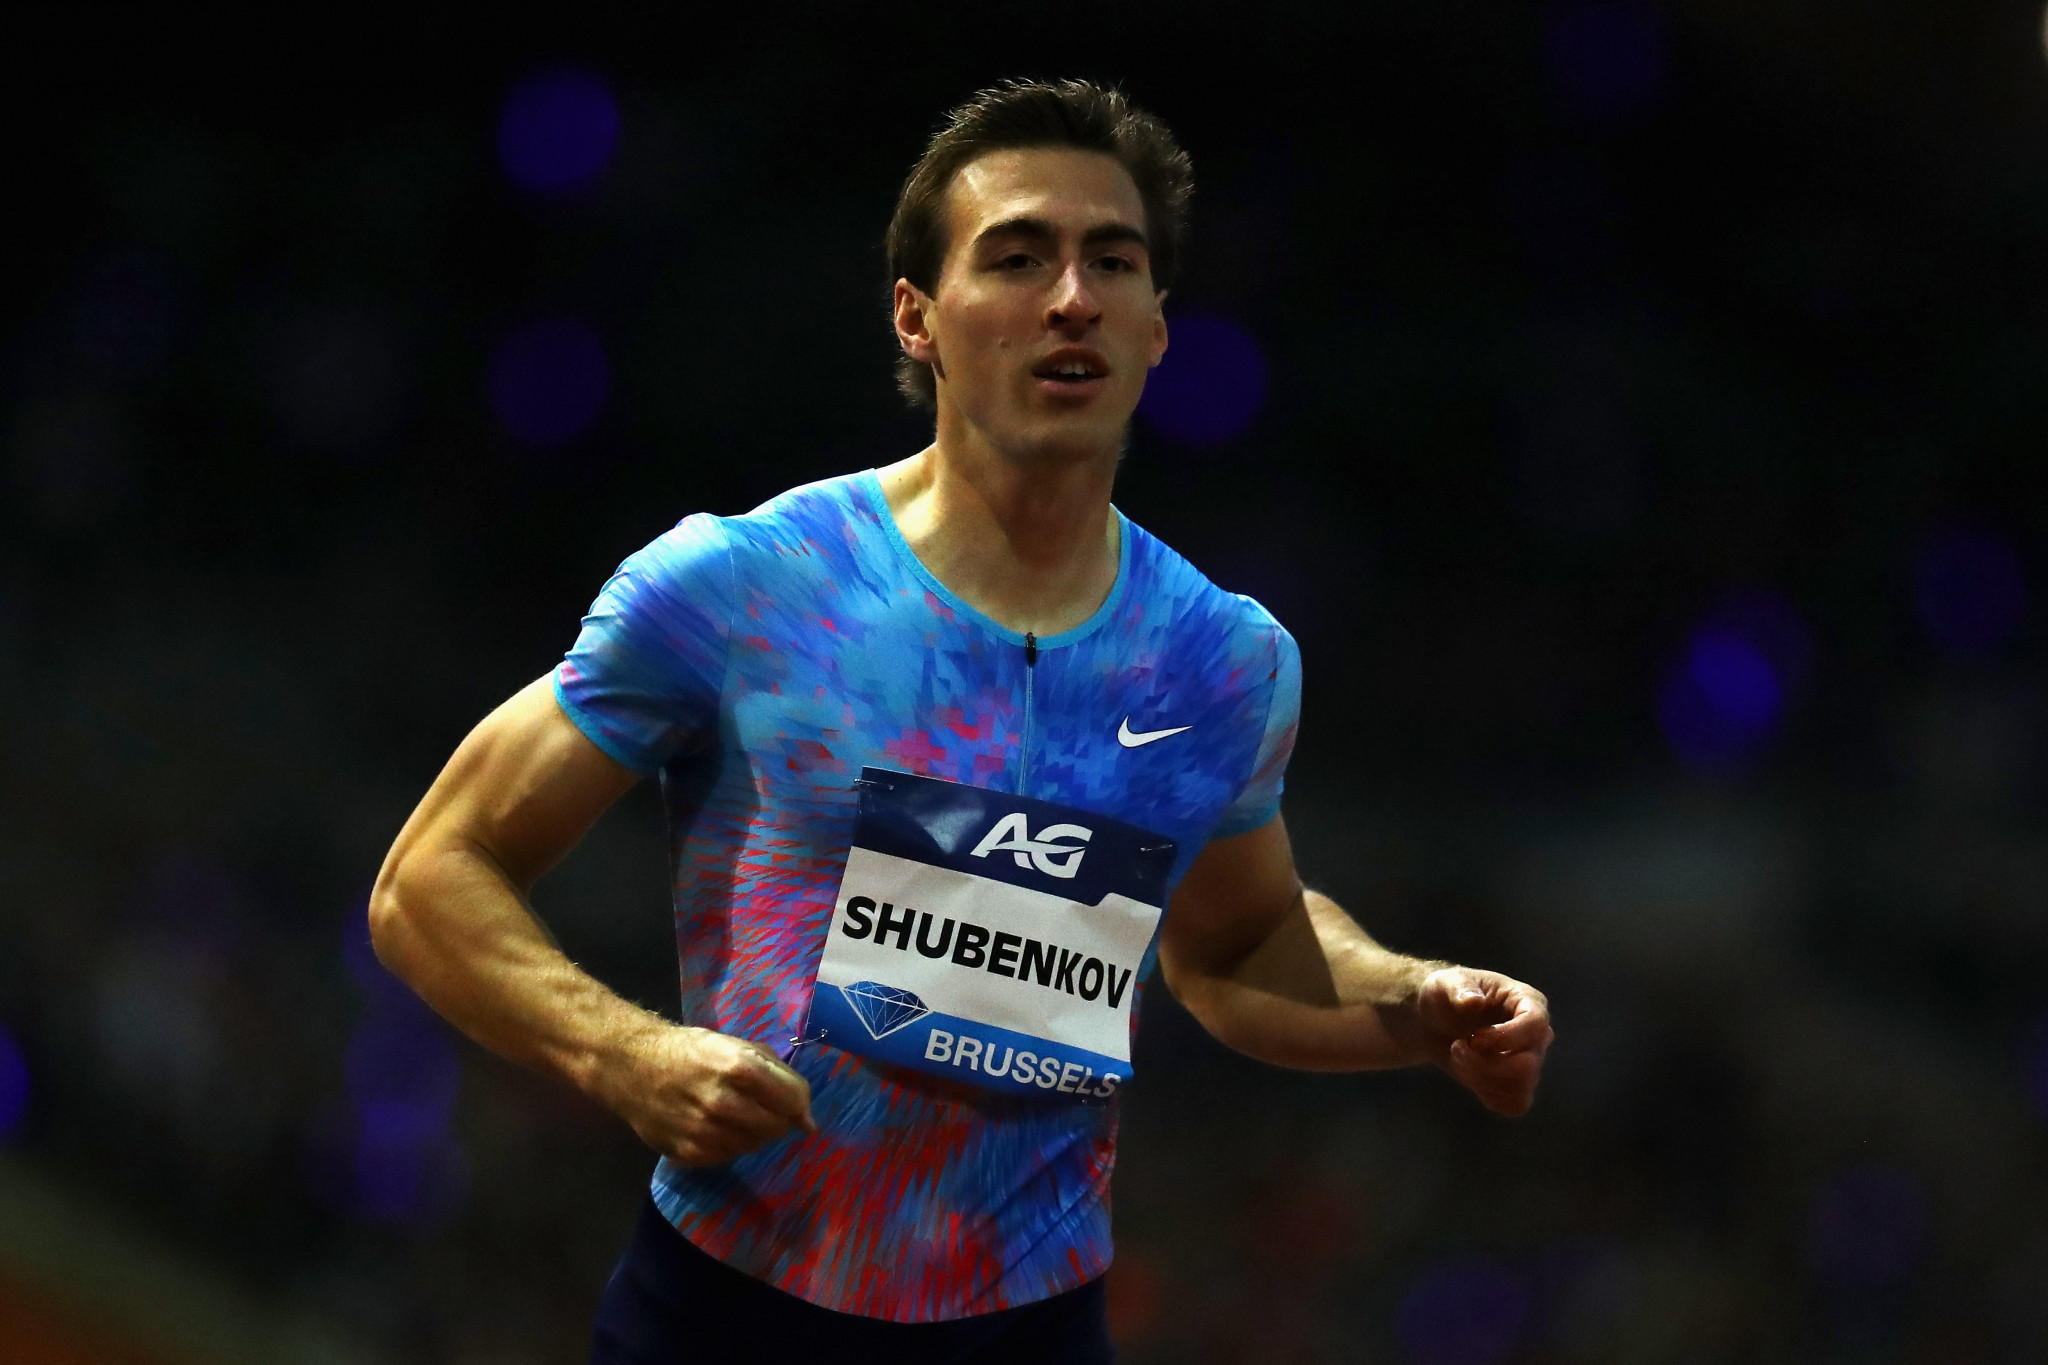 Russian athletes including hurdler Sergey Shubenkov will have to apply to compete neutrally in 2018 ©Getty Images